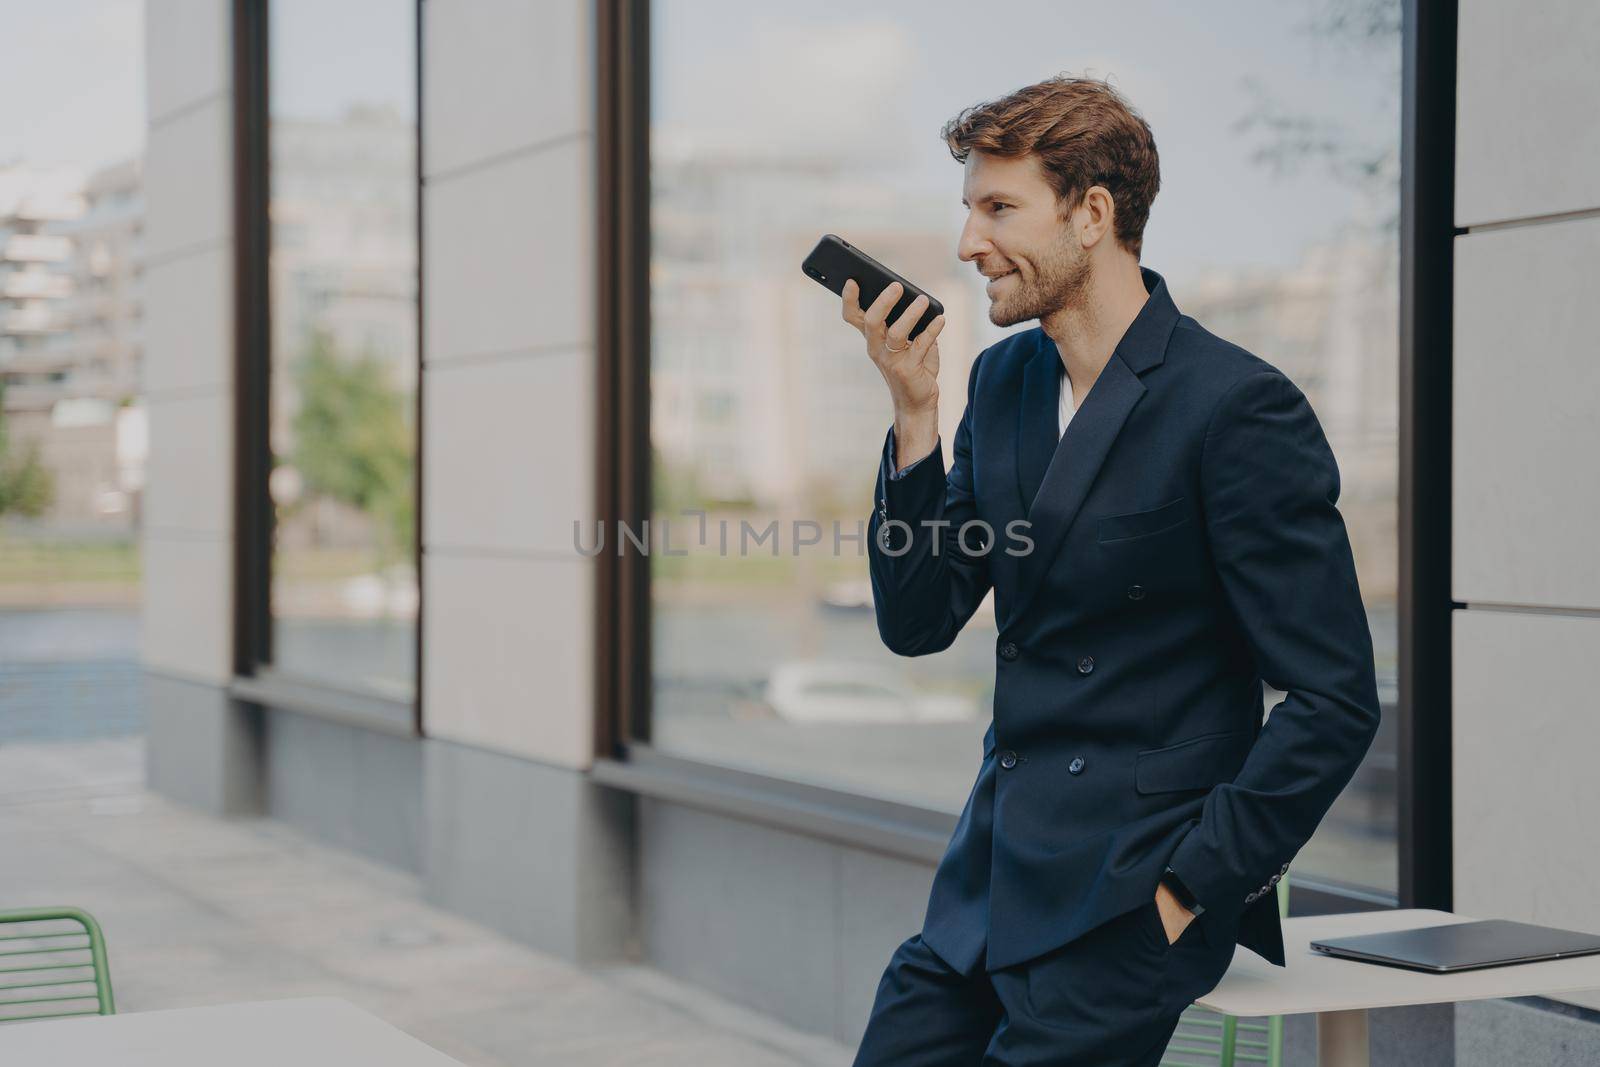 Confident businessman with smartphone using voice assistant app while leaning on cafe table outdoors by vkstock